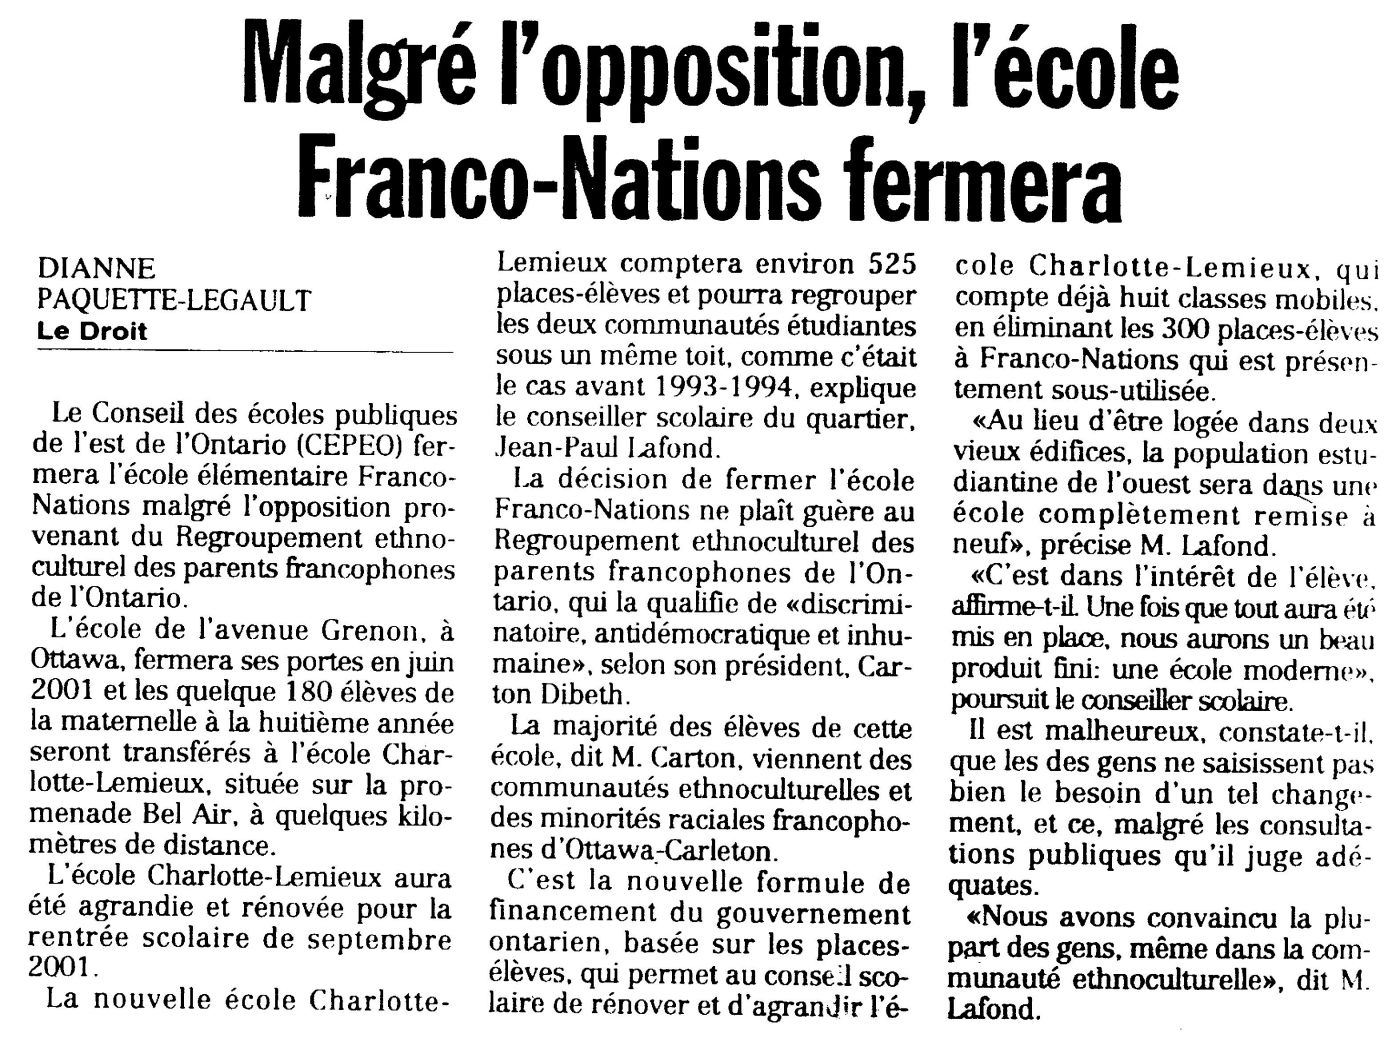 French newspaper article. The title appears in bold at the top of the page. The article is printed in three columns. It is signed.